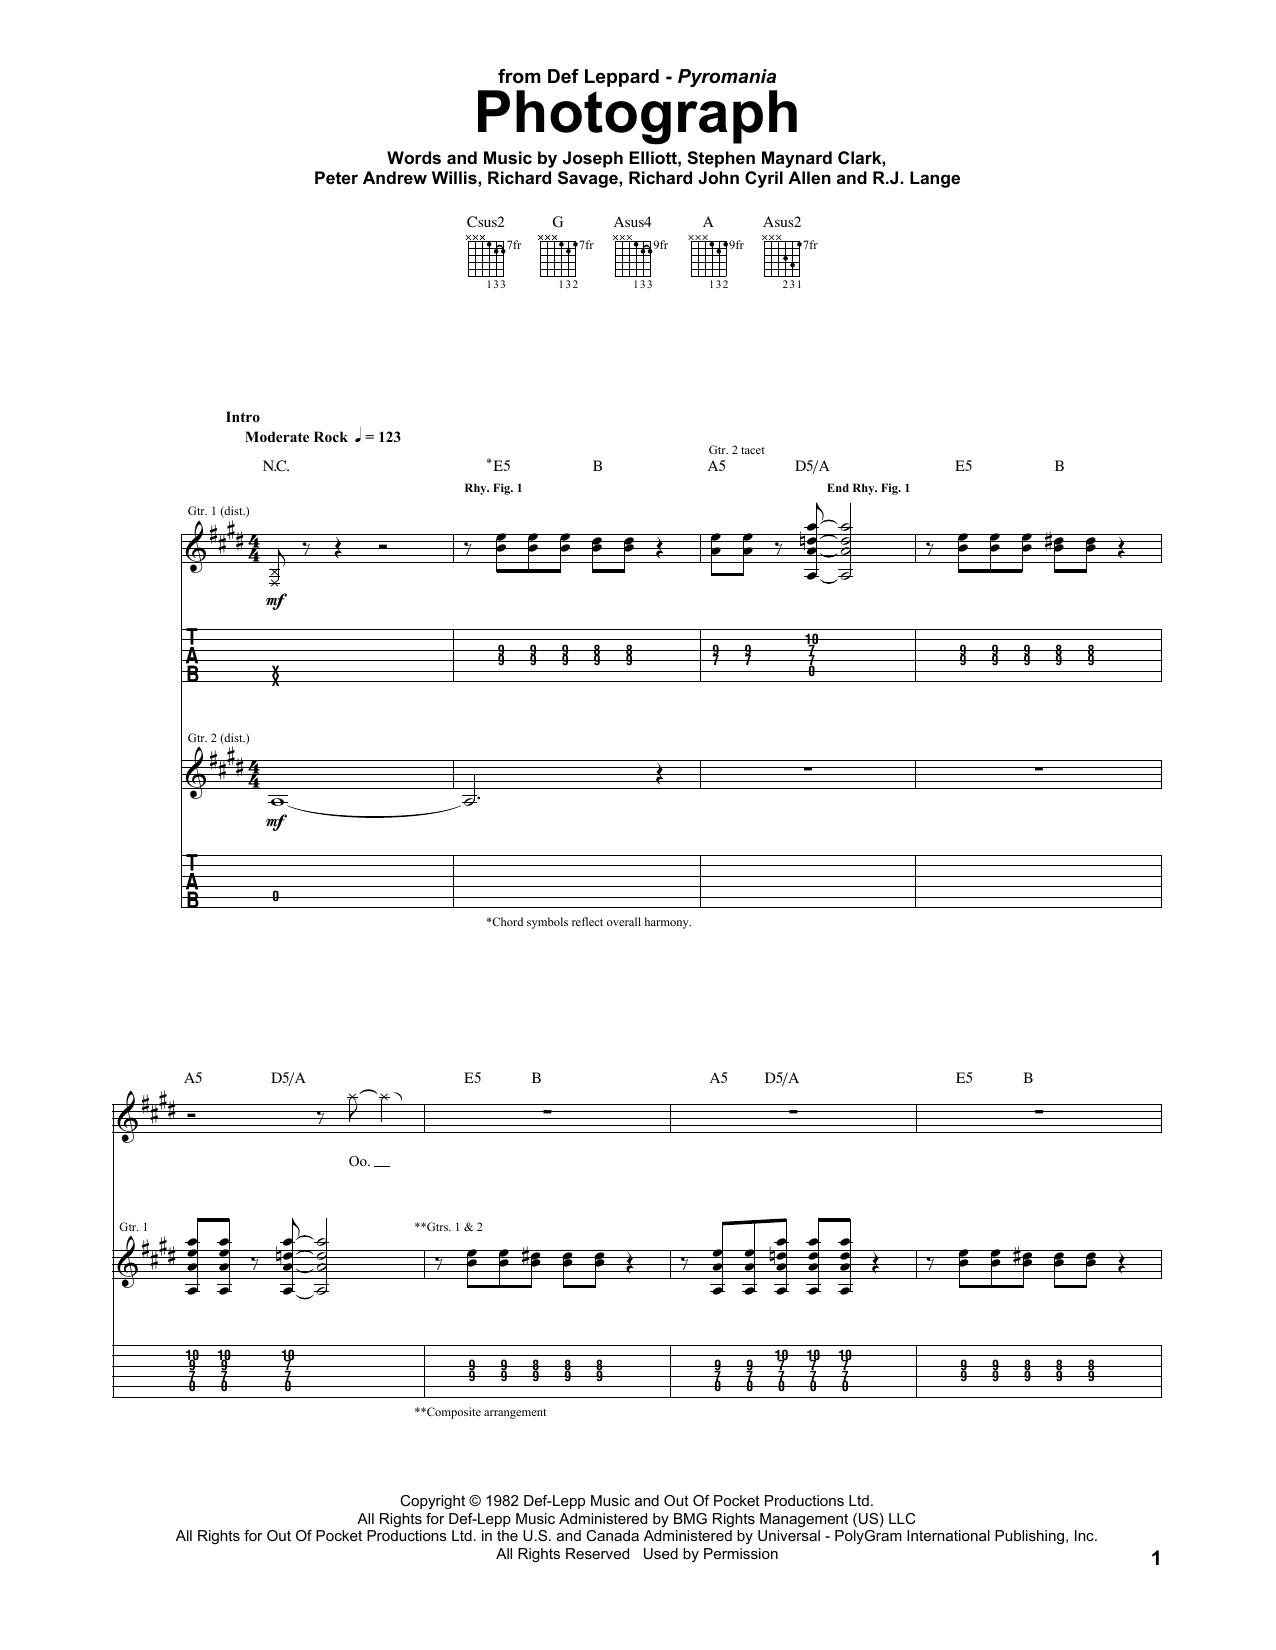 Def Leppard Photograph sheet music notes and chords. Download Printable PDF.